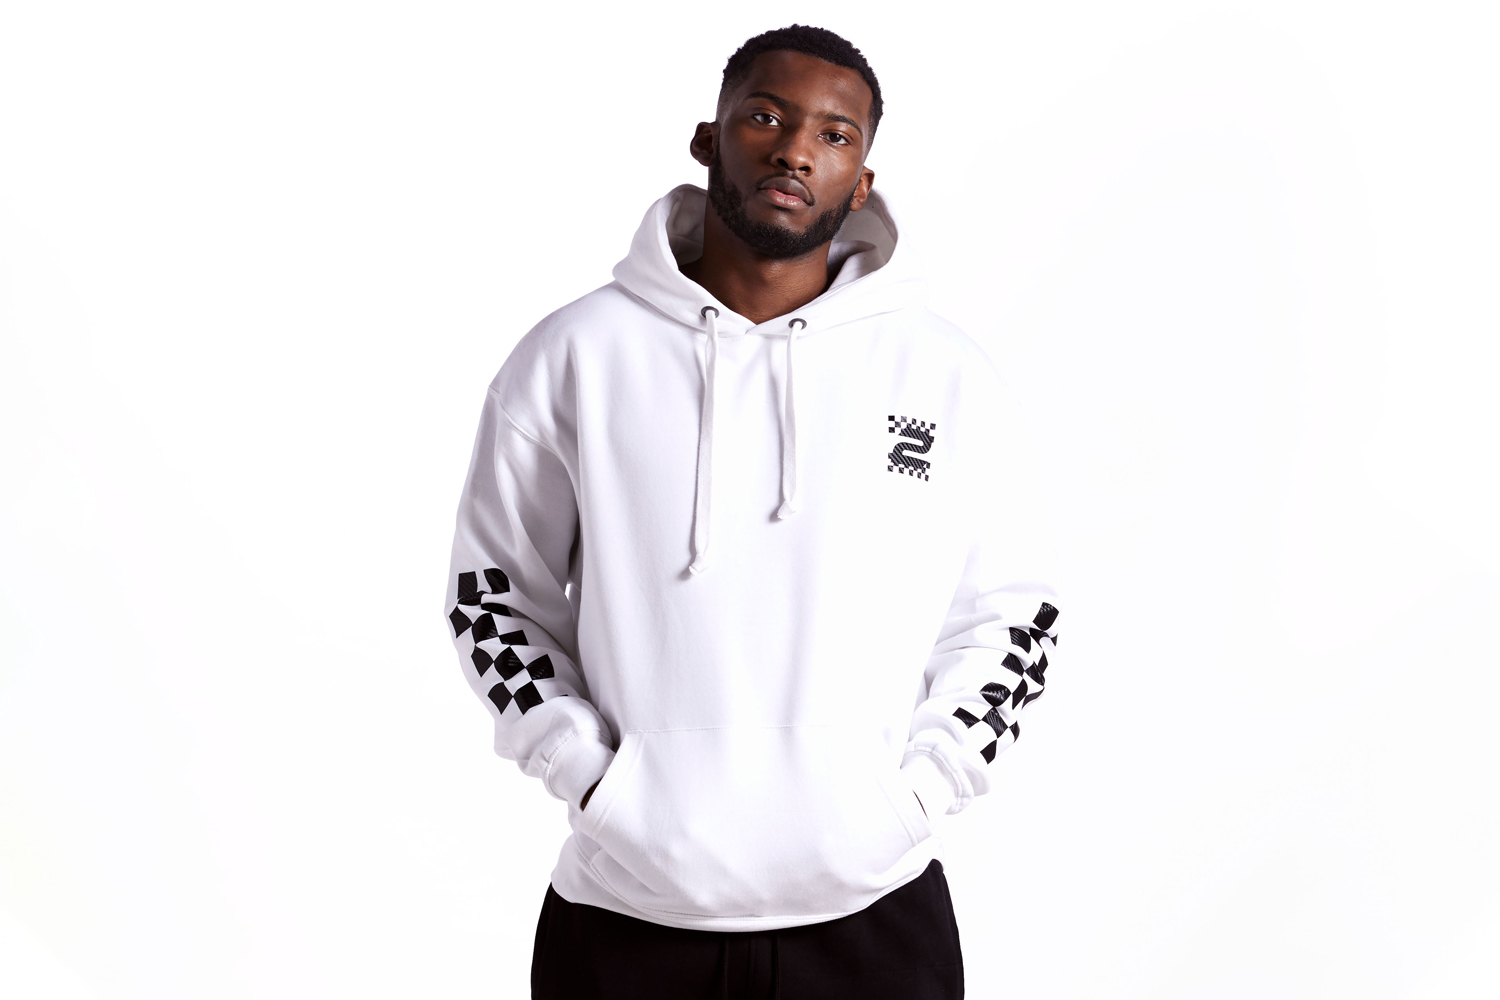 idris elba debuts new 2hr set fashion line inspired by dj culture chequered print hoodie white